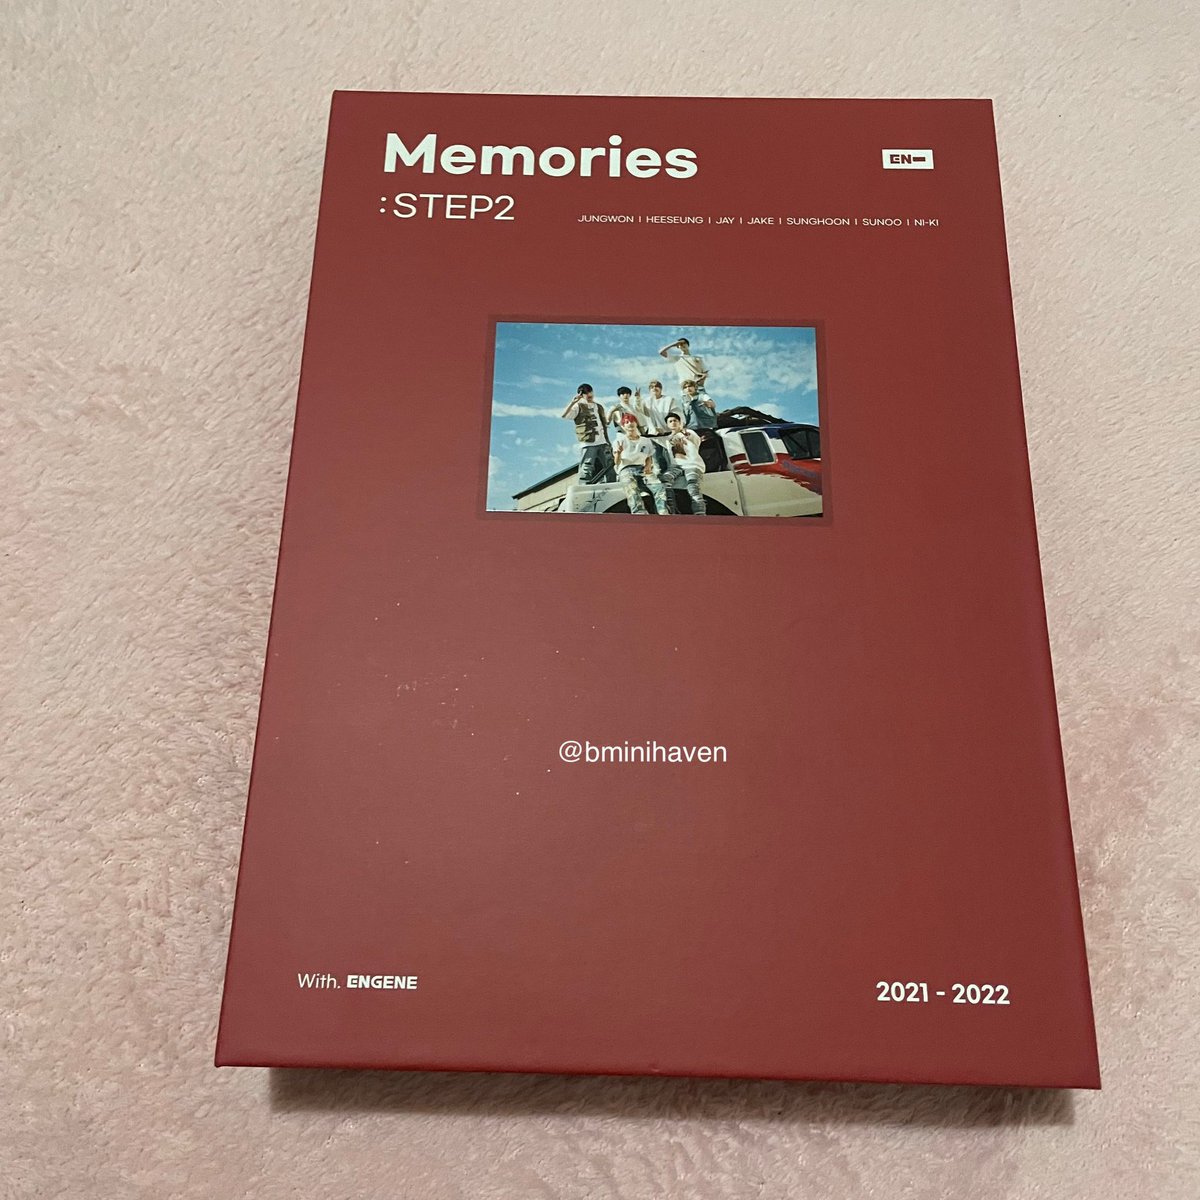 WTS LFB Memories Step2 

🏷 ₱600 all in 
📍 outbox photobook and postcard
📍 payo or installment +50
📍 ₱300 dp bal aug 15
📍on hand
📍mint 10/10

Comment Mine

Enhypen Memories Step 2 Digicode